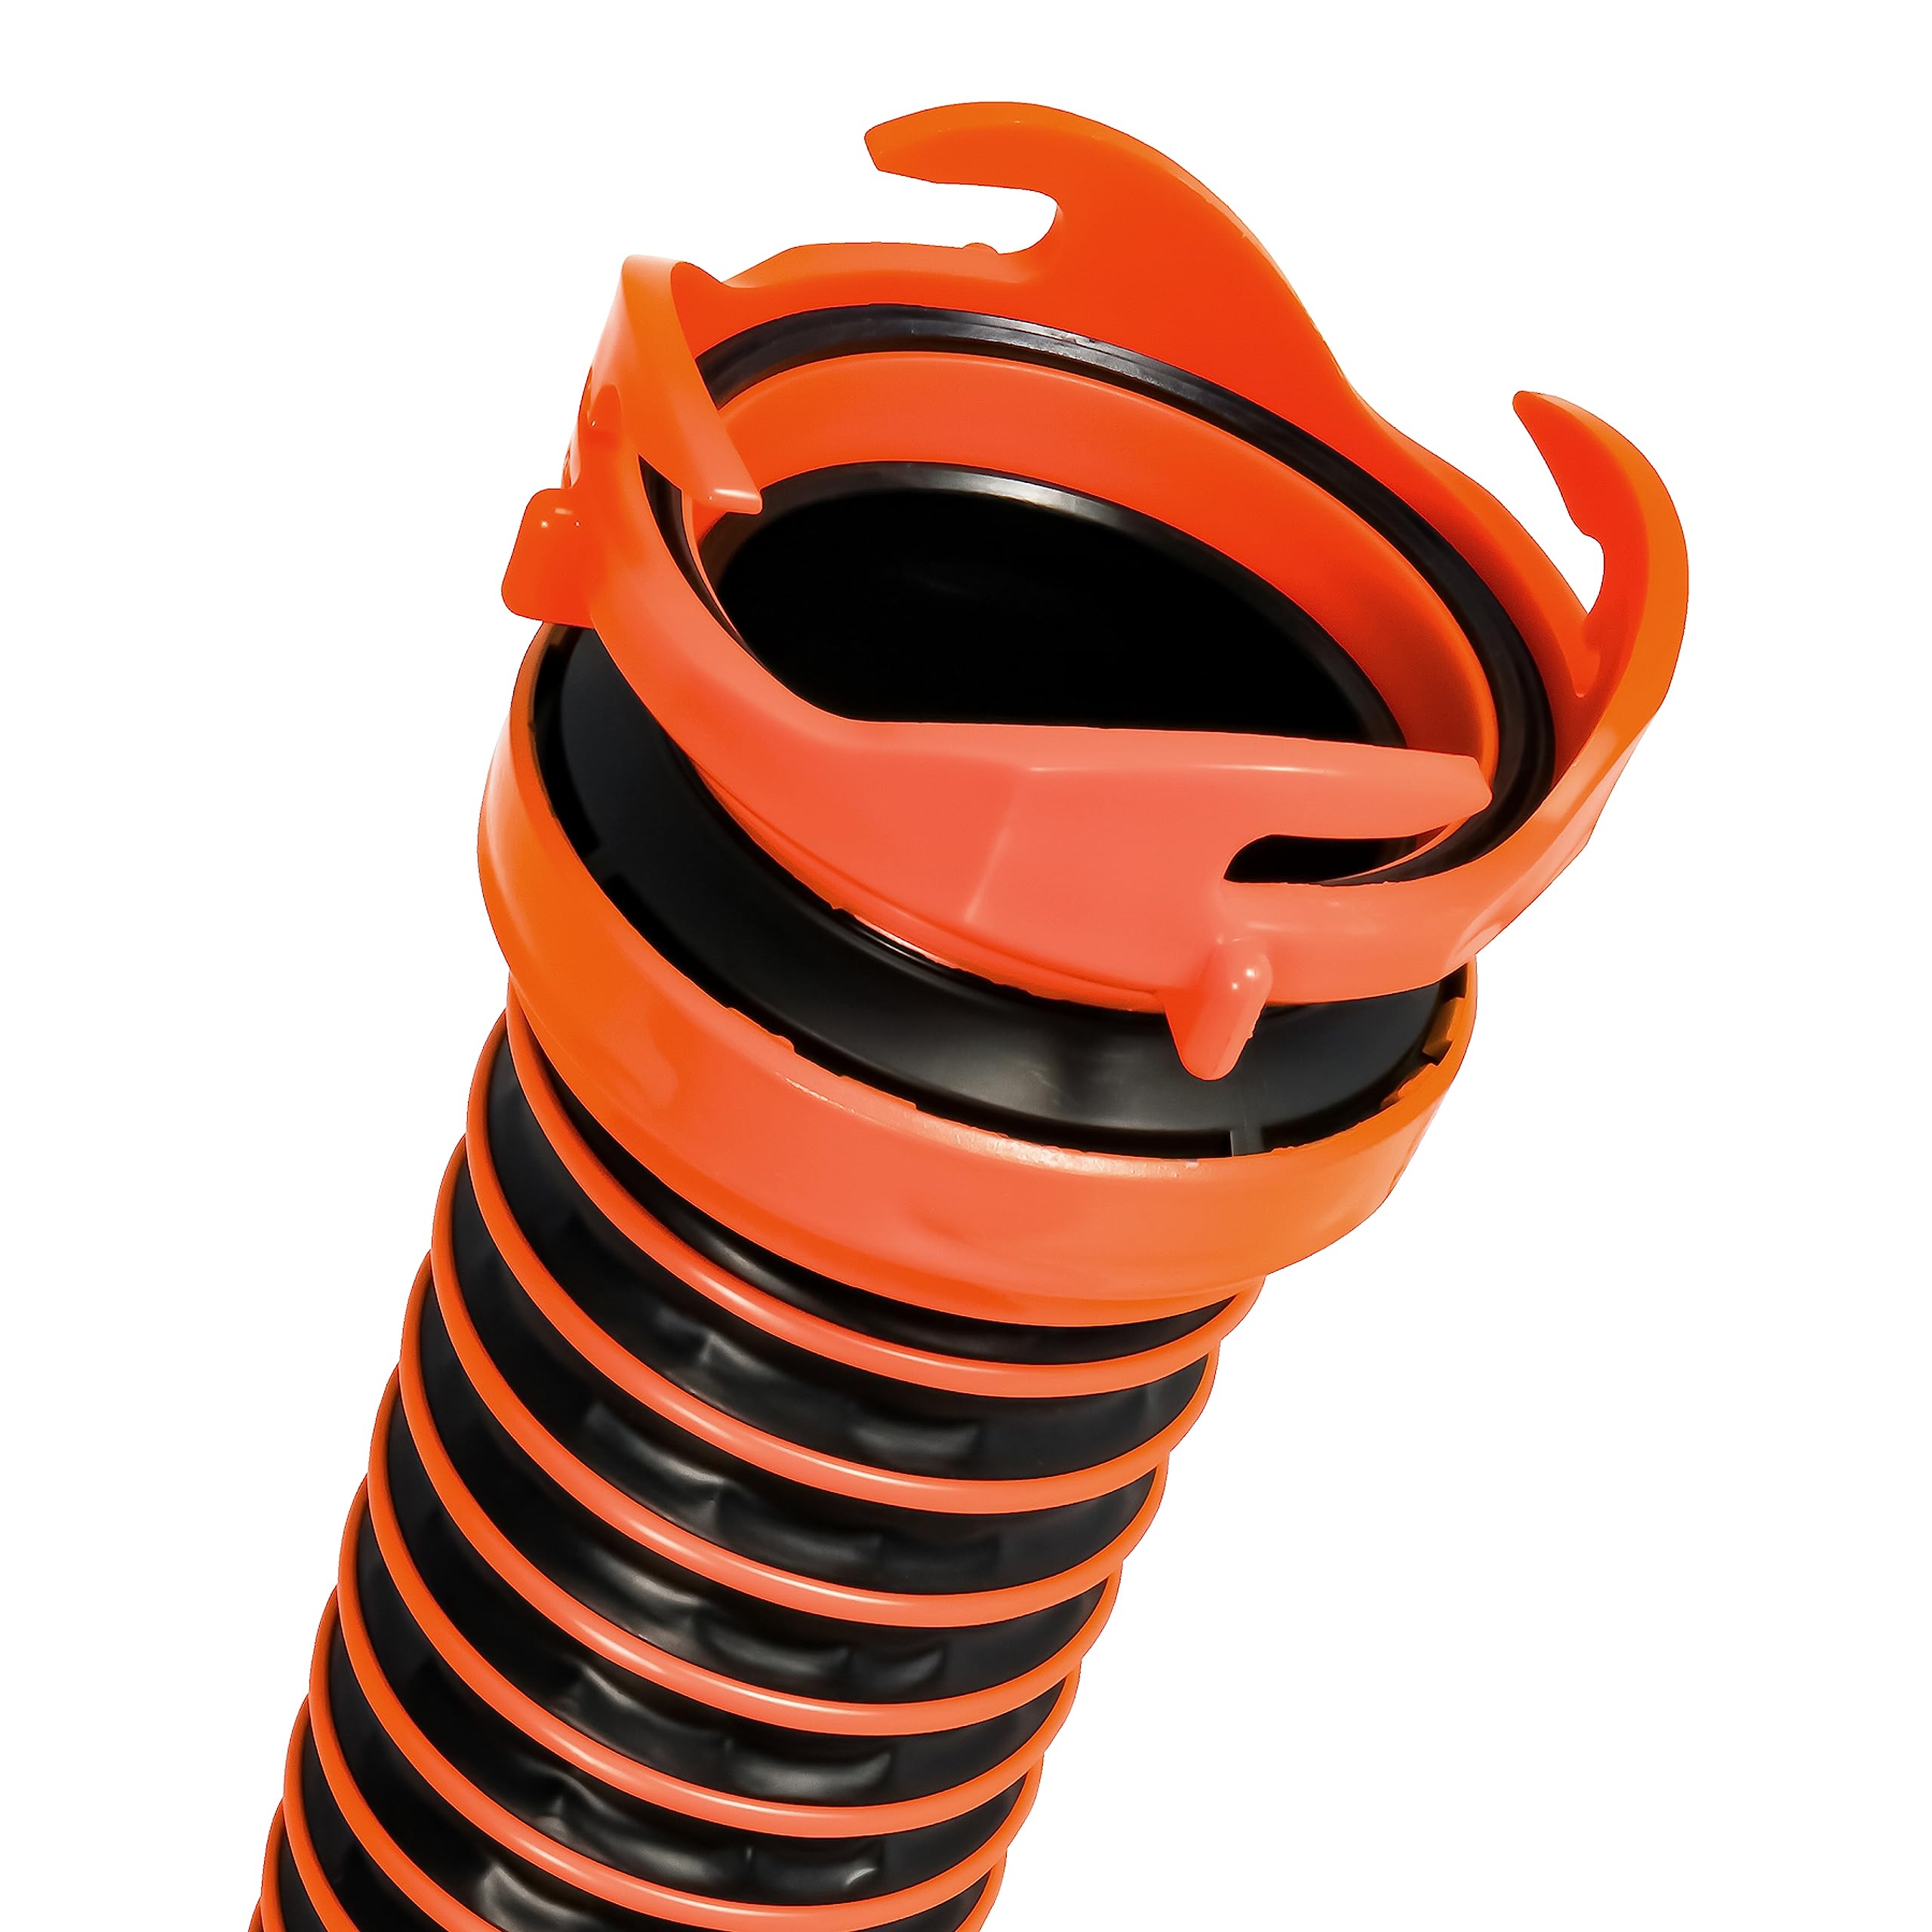 Camco RhinoEXTREME 20-Foot Camper/RV Sewer Hose Kit | Features TPE Technology for Abrasion Resistance and Crush Protection | Includes Pre-Attached Rhino Swivel Fittings (21012)